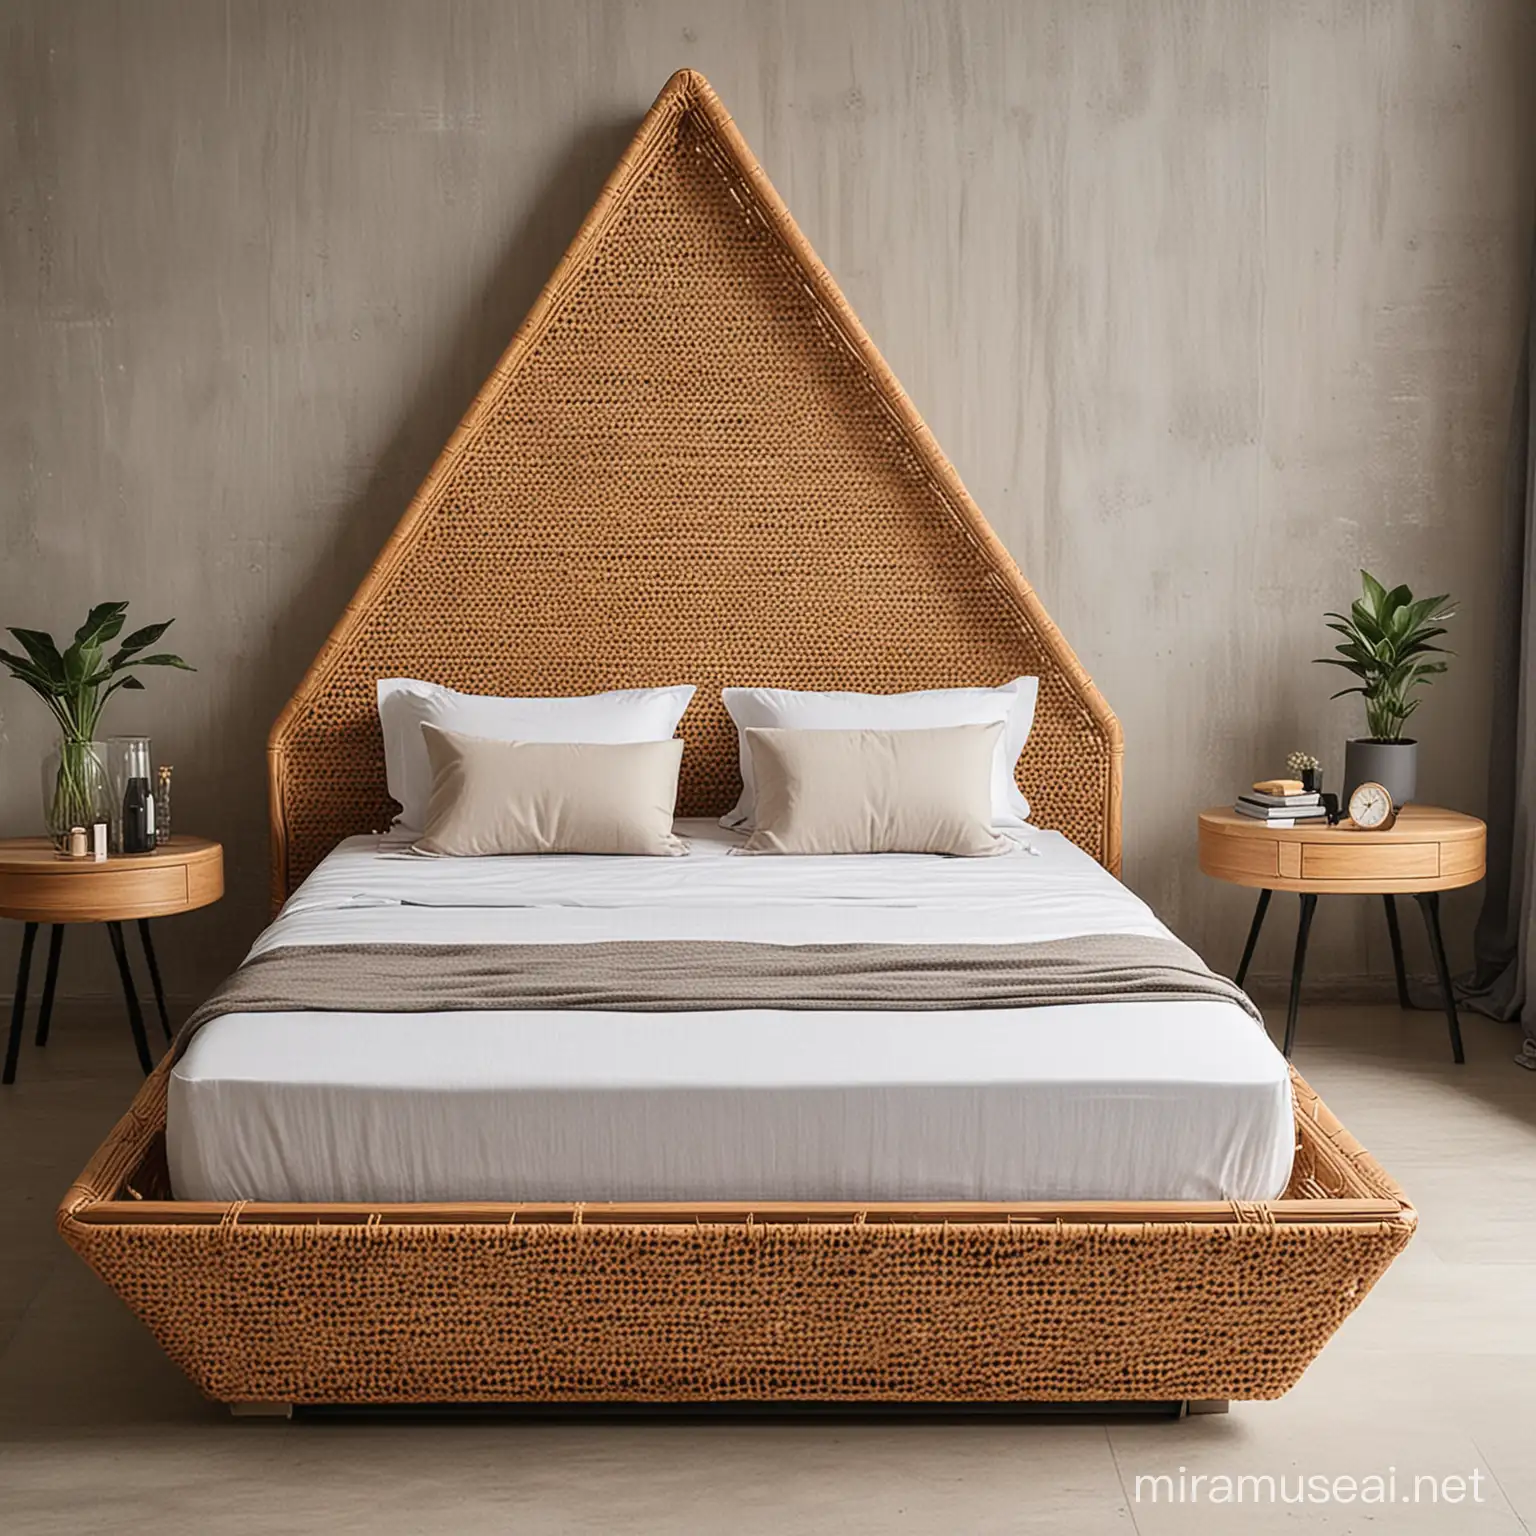 unique and modern single bed with rattan and wood material triangle
shape